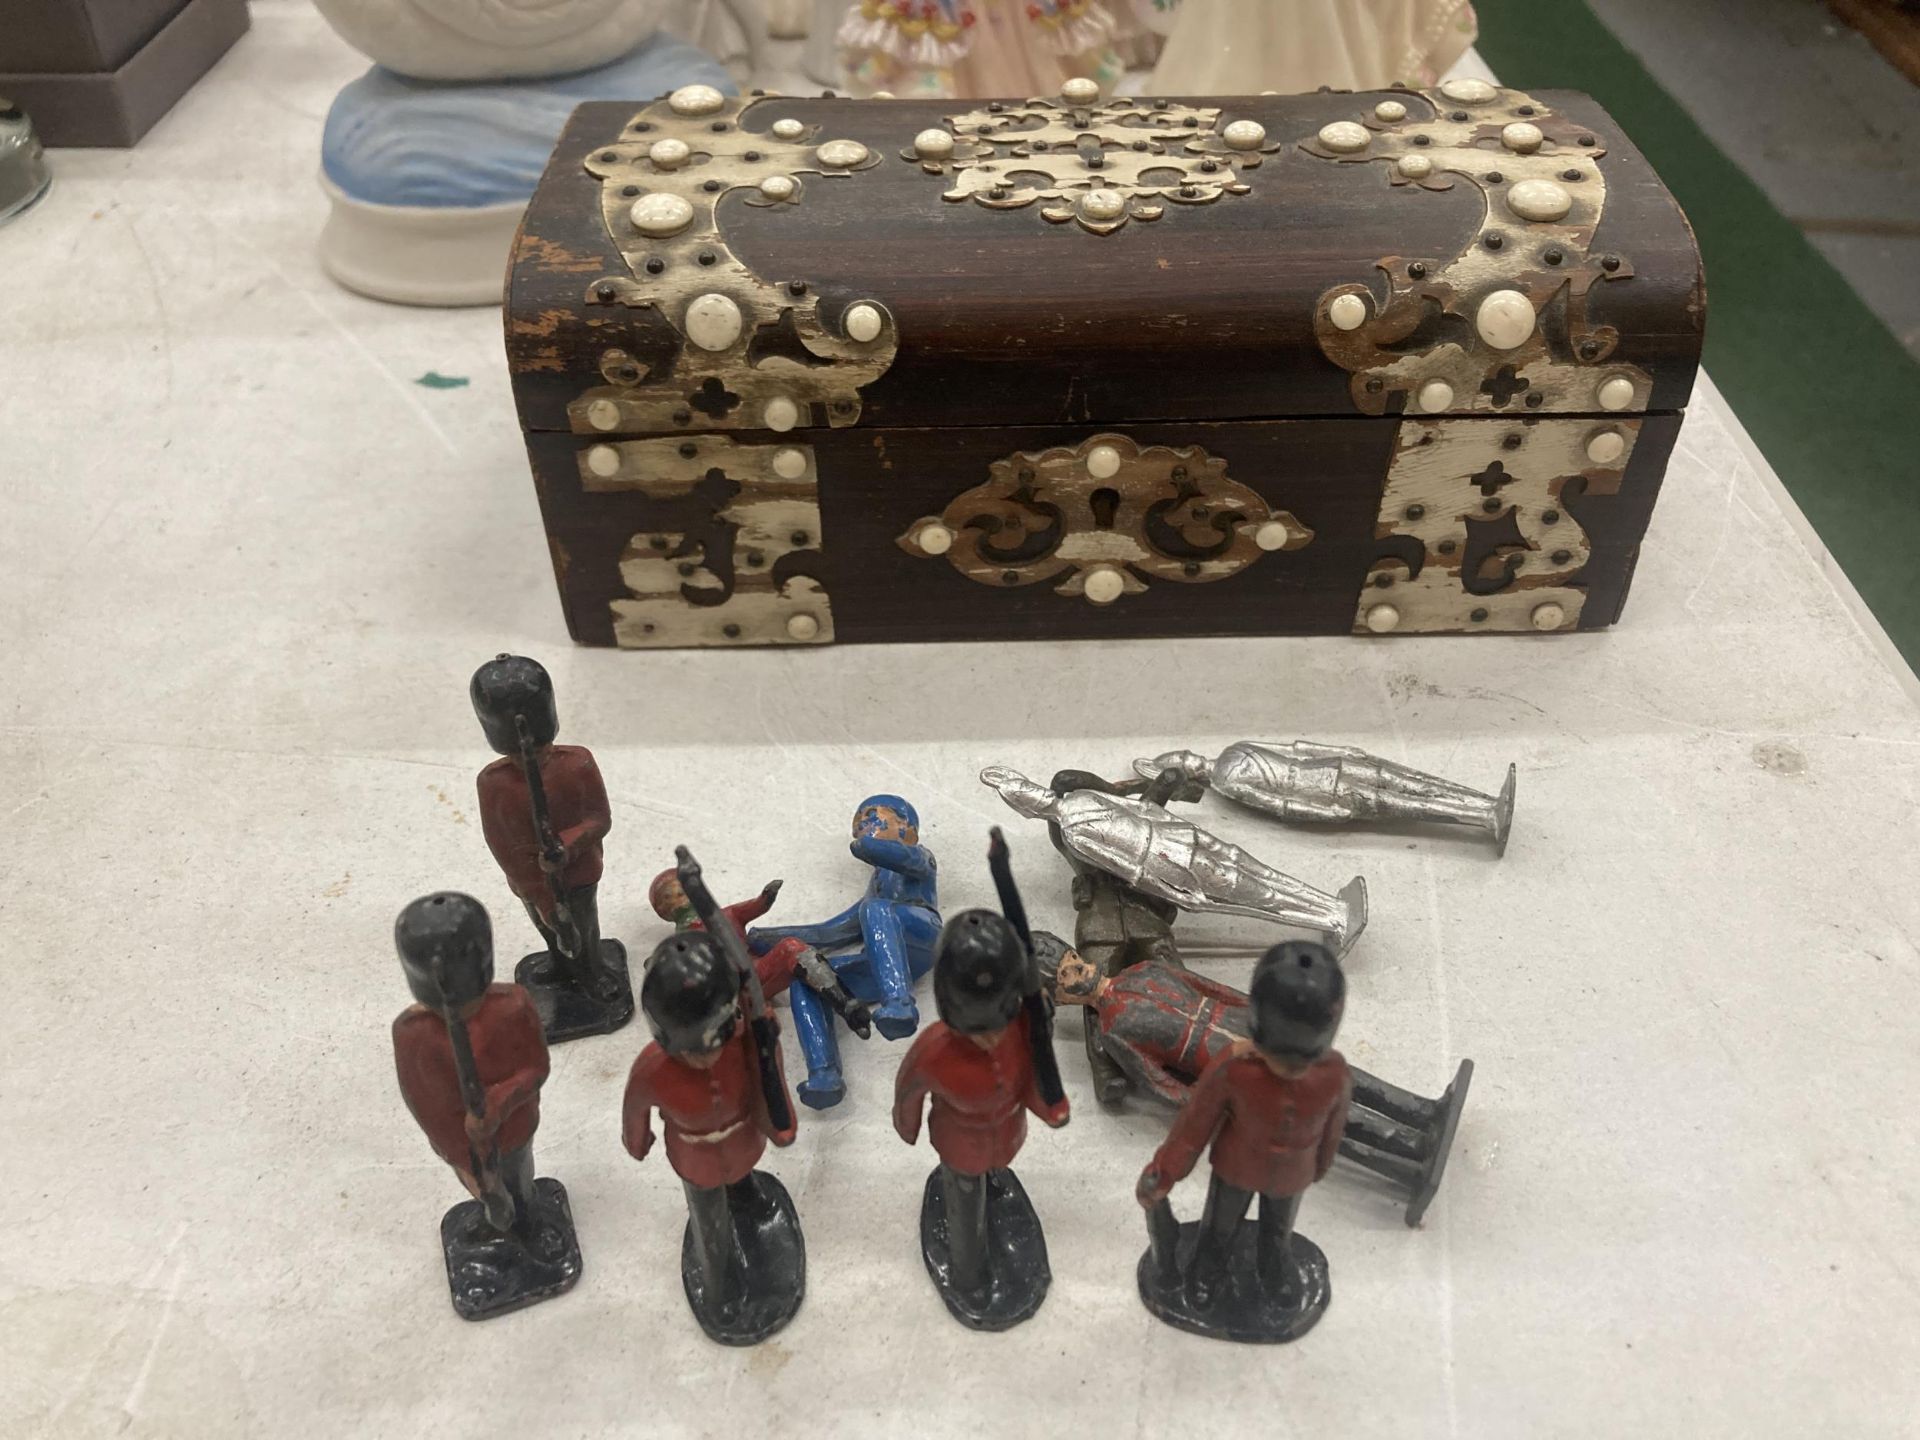 A QUANTITY OF LEAD FIGURES IN A DECORATIVE WOODEN BOX